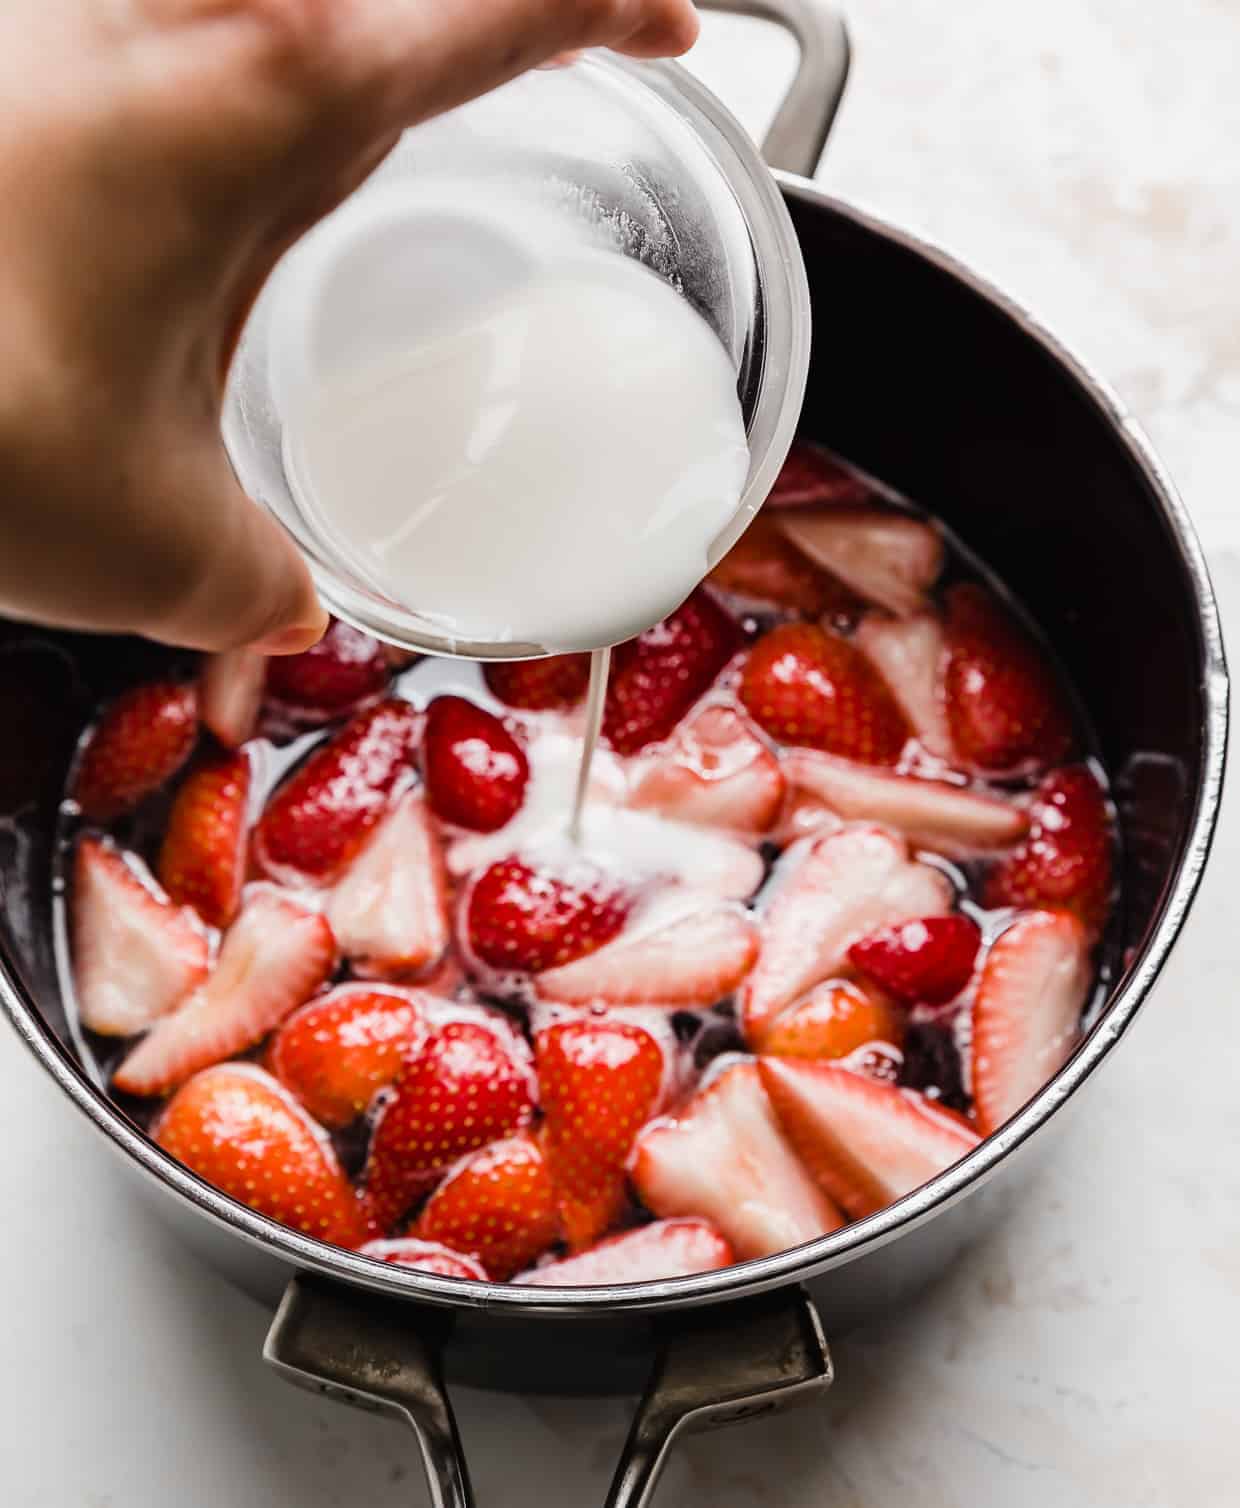 A cornstarch slurry being poured overtop cut strawberries in a pan.